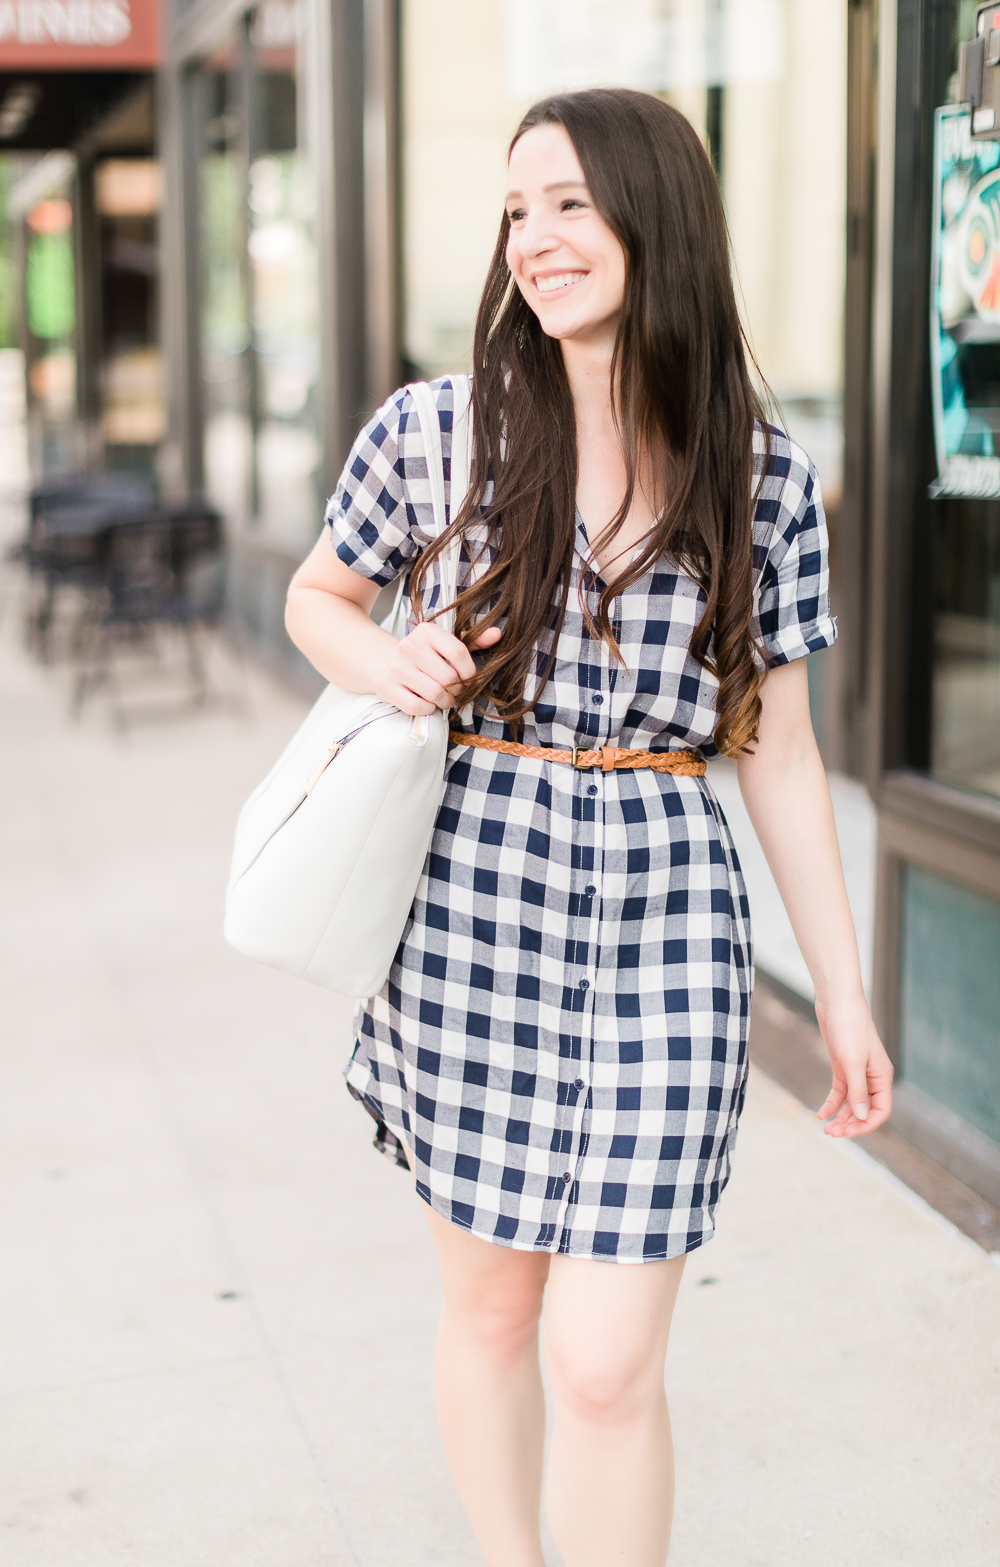 How to wear a plaid shirtdress in the summer by southern fashion blogger Stephanie Ziajka from Diary of a Debutante, how to wear plaid shirtdress, plaid shirt dress outfit, style plaid, BB Dakota Cicely Shirtdress styled with white Jack Rogers sandals, a white Vera Bradley Mallory tote, skinny braided leather belt, and large pearl stud earrings